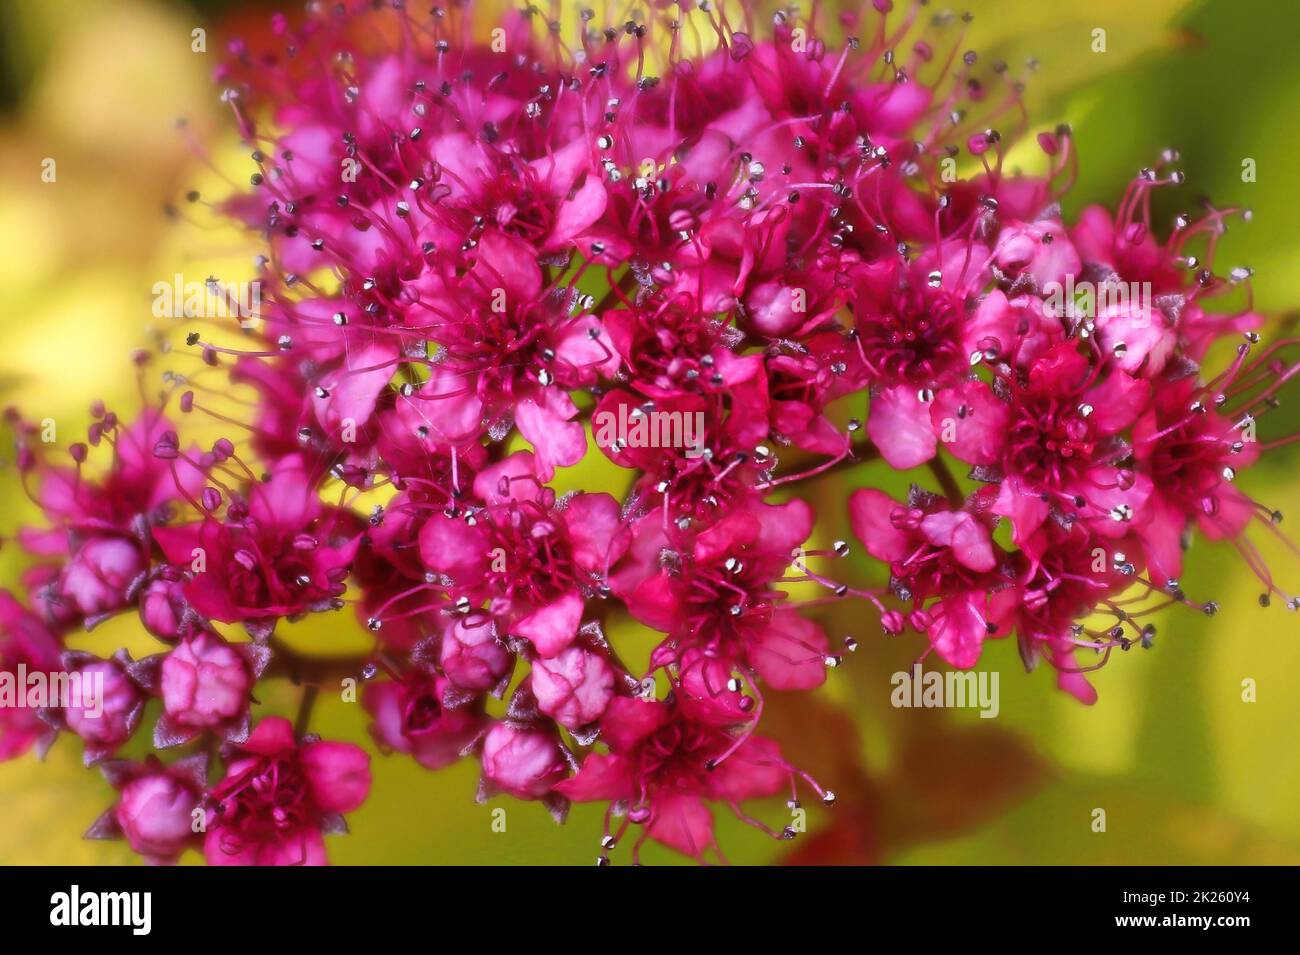 Macro of pink flowers on a Spirea plant Stock Photo